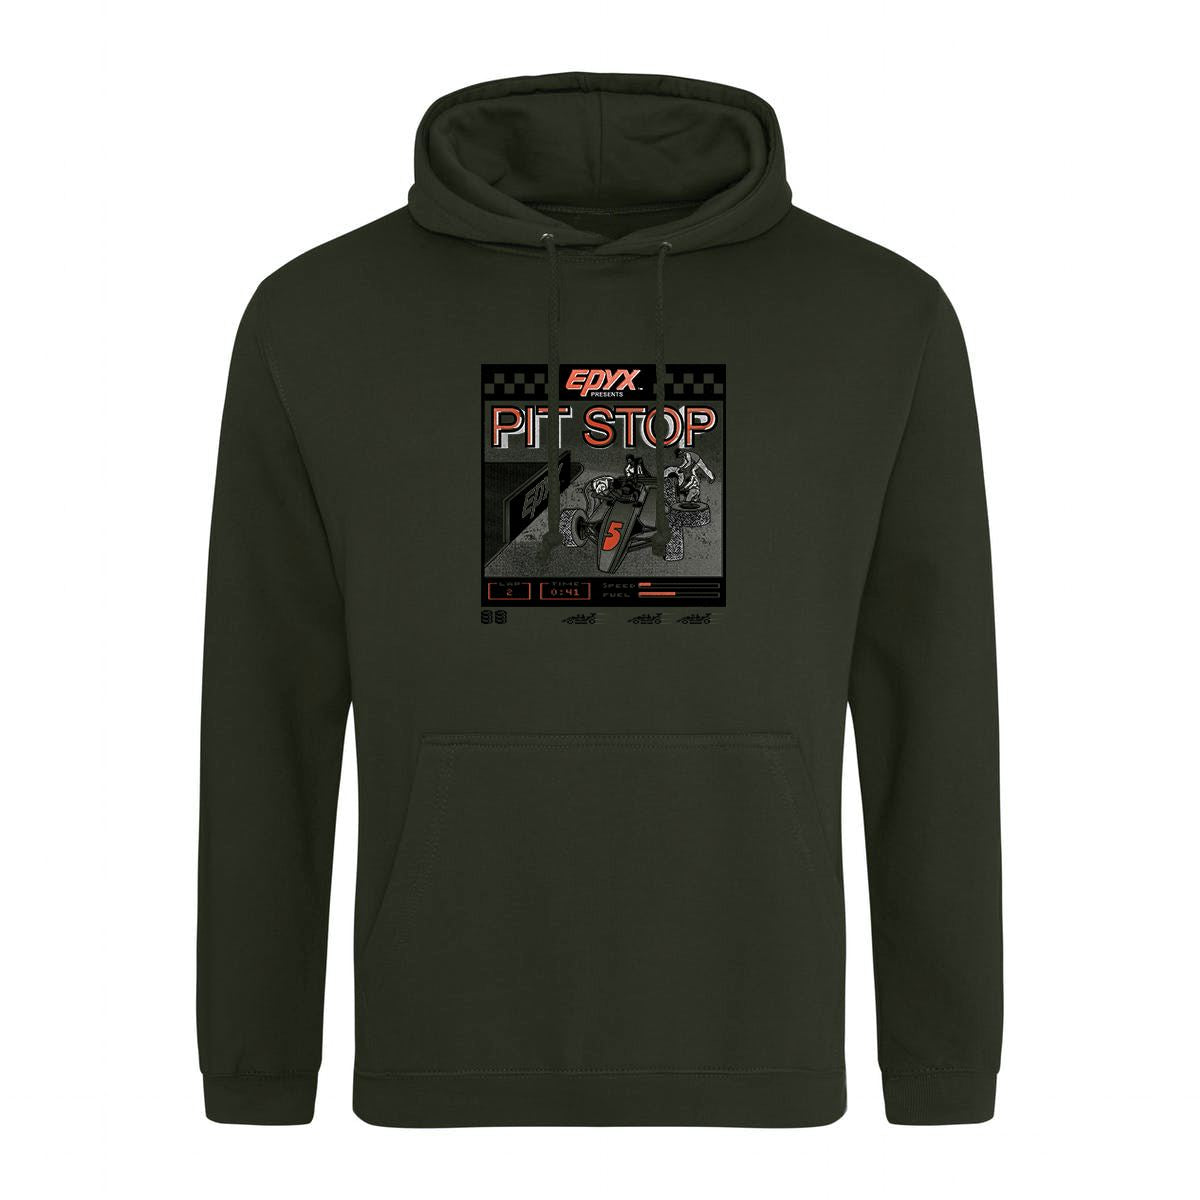 Pitstop Retro Gaming Hoodie Hoodie Seven Squared Small 36" Chest Combat Green 